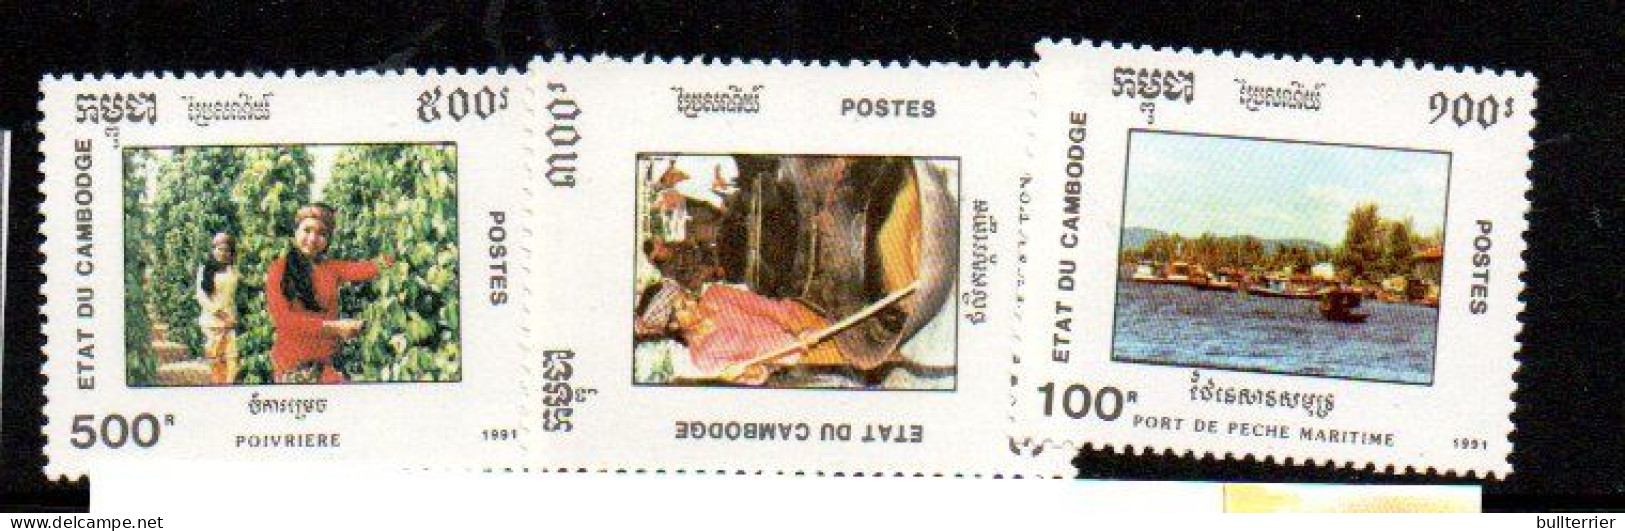 CAMBODIA - 1991 FOOD INDUSTRY SET OF 3 MINT NEVER HINGED - Cambodge